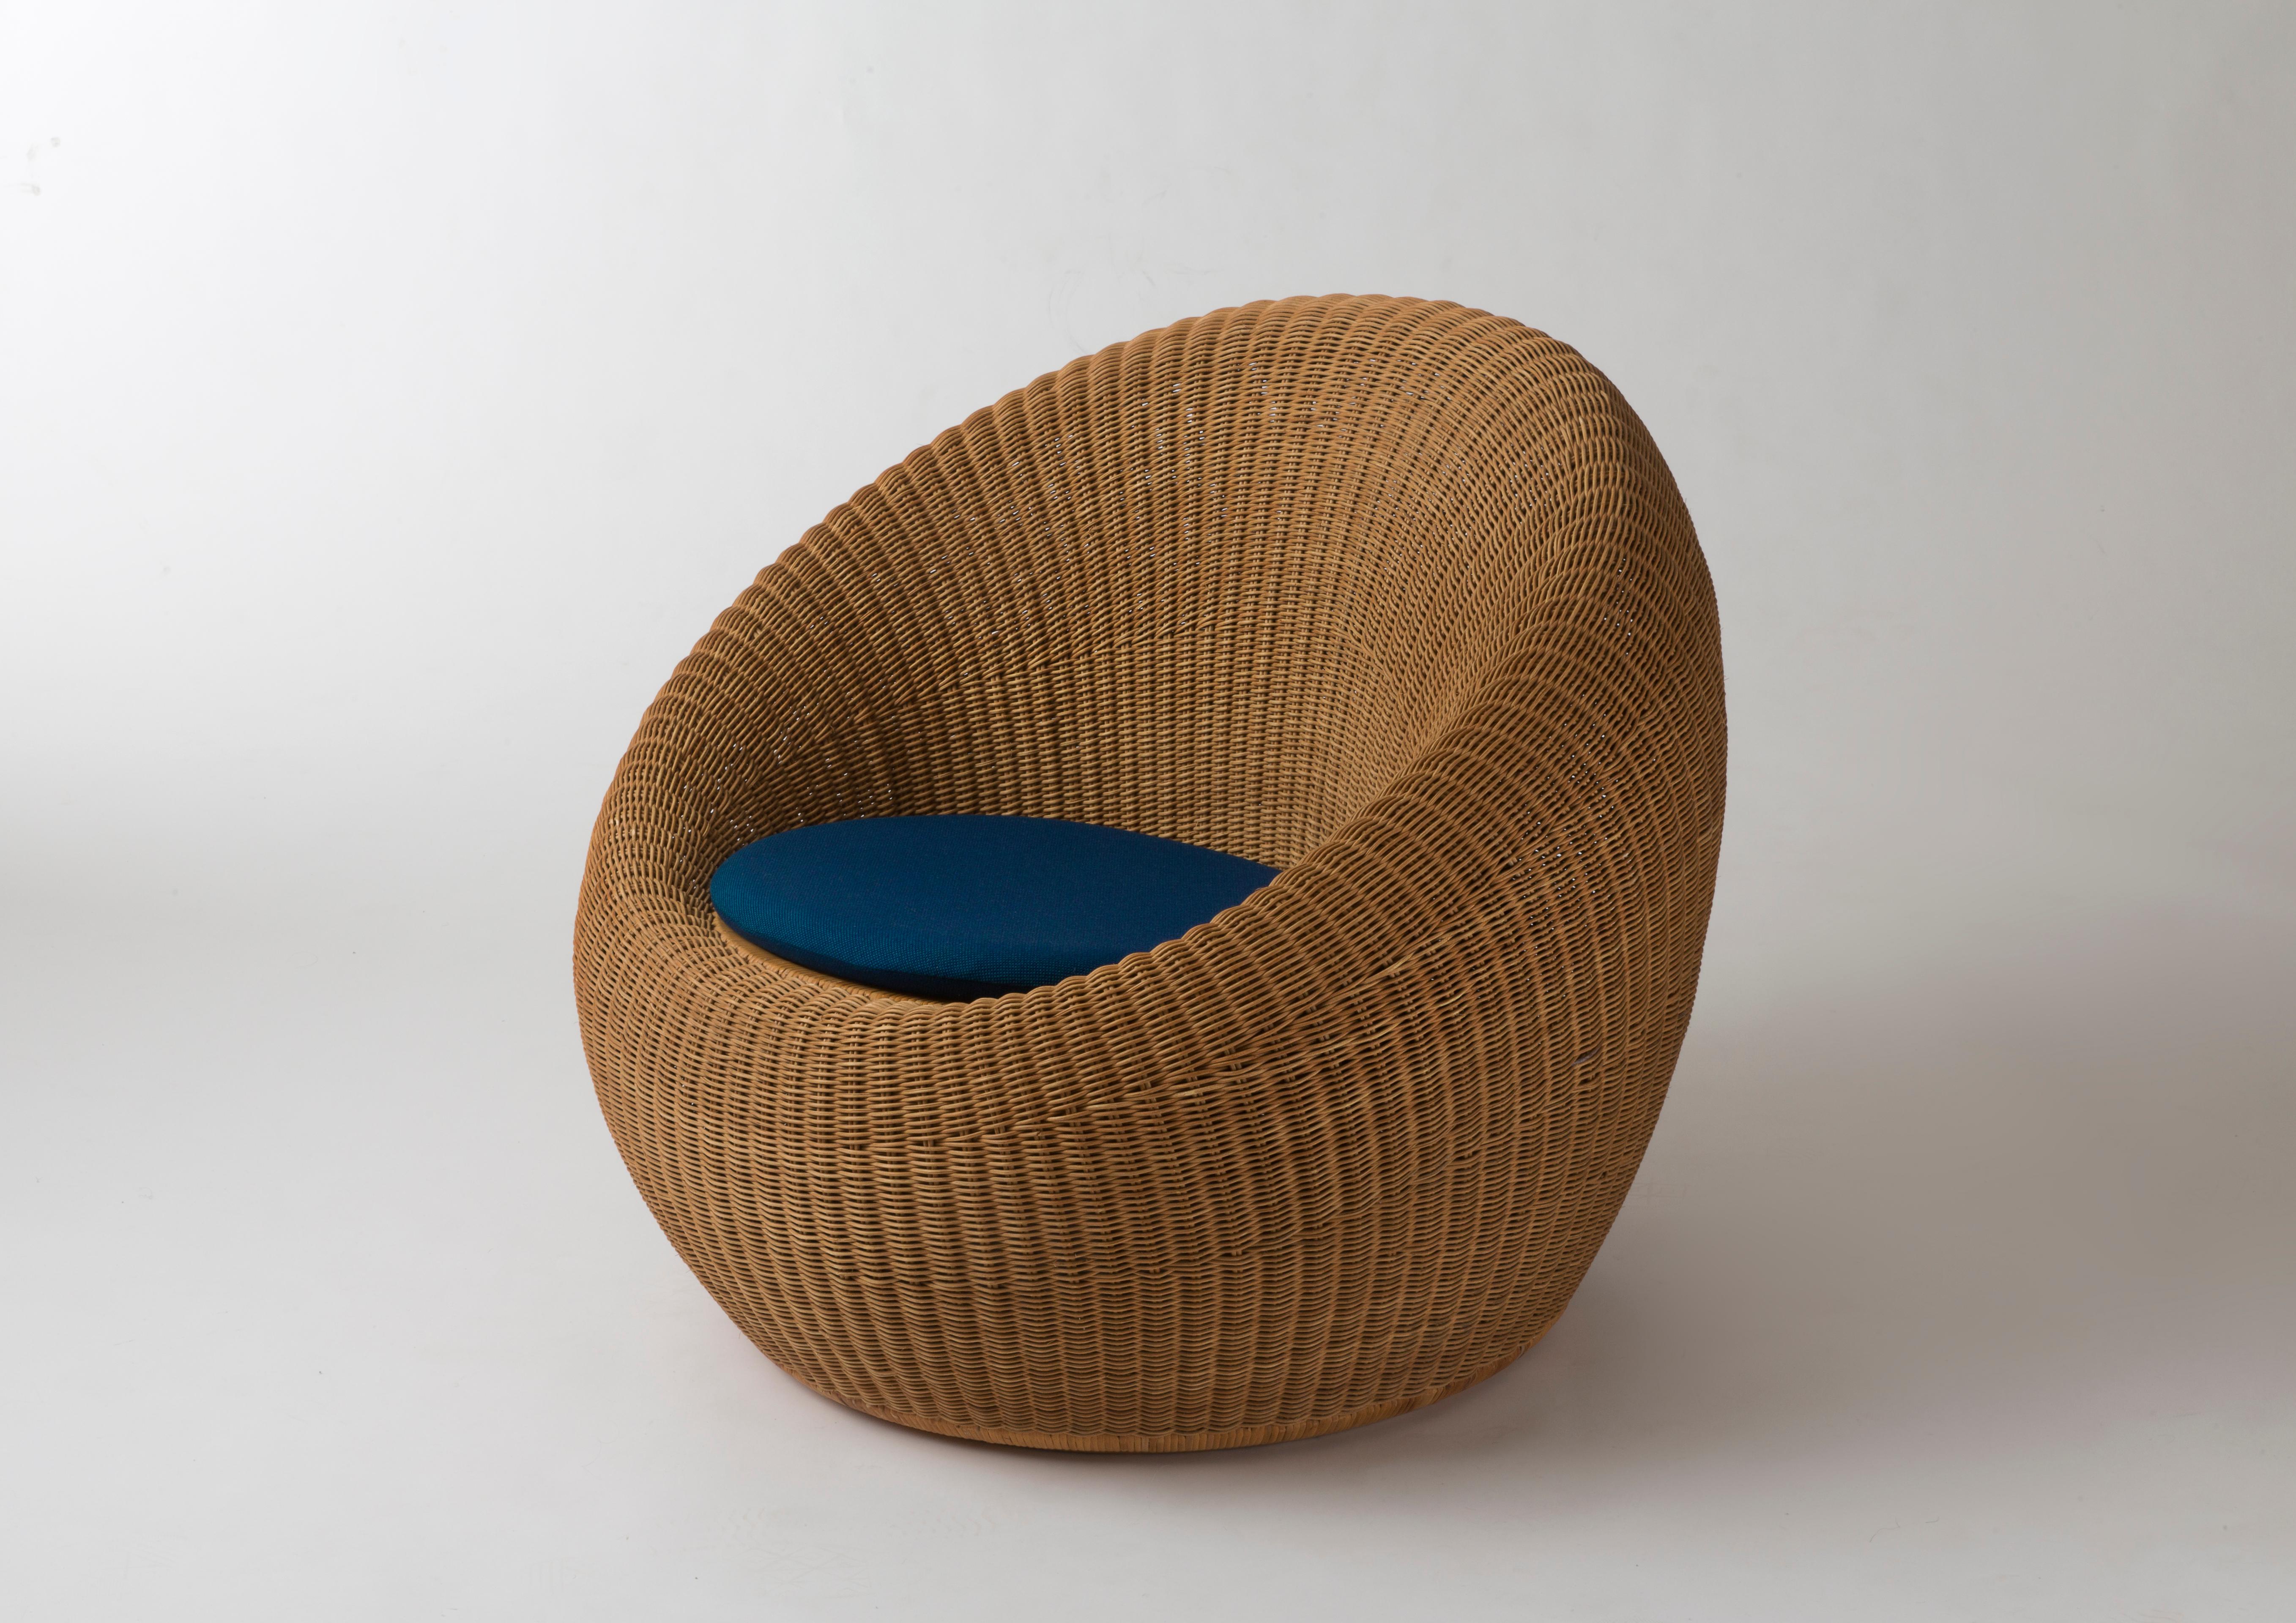 This easy chair model “C-3150” from the “Rattan Furnitures” series designed by the famous Japanese designer Isamu Kenmochi (1912-1971), made of rattan on bamboo, are manufactured by Yamakawa Rattan (Japan), model designed in 1958